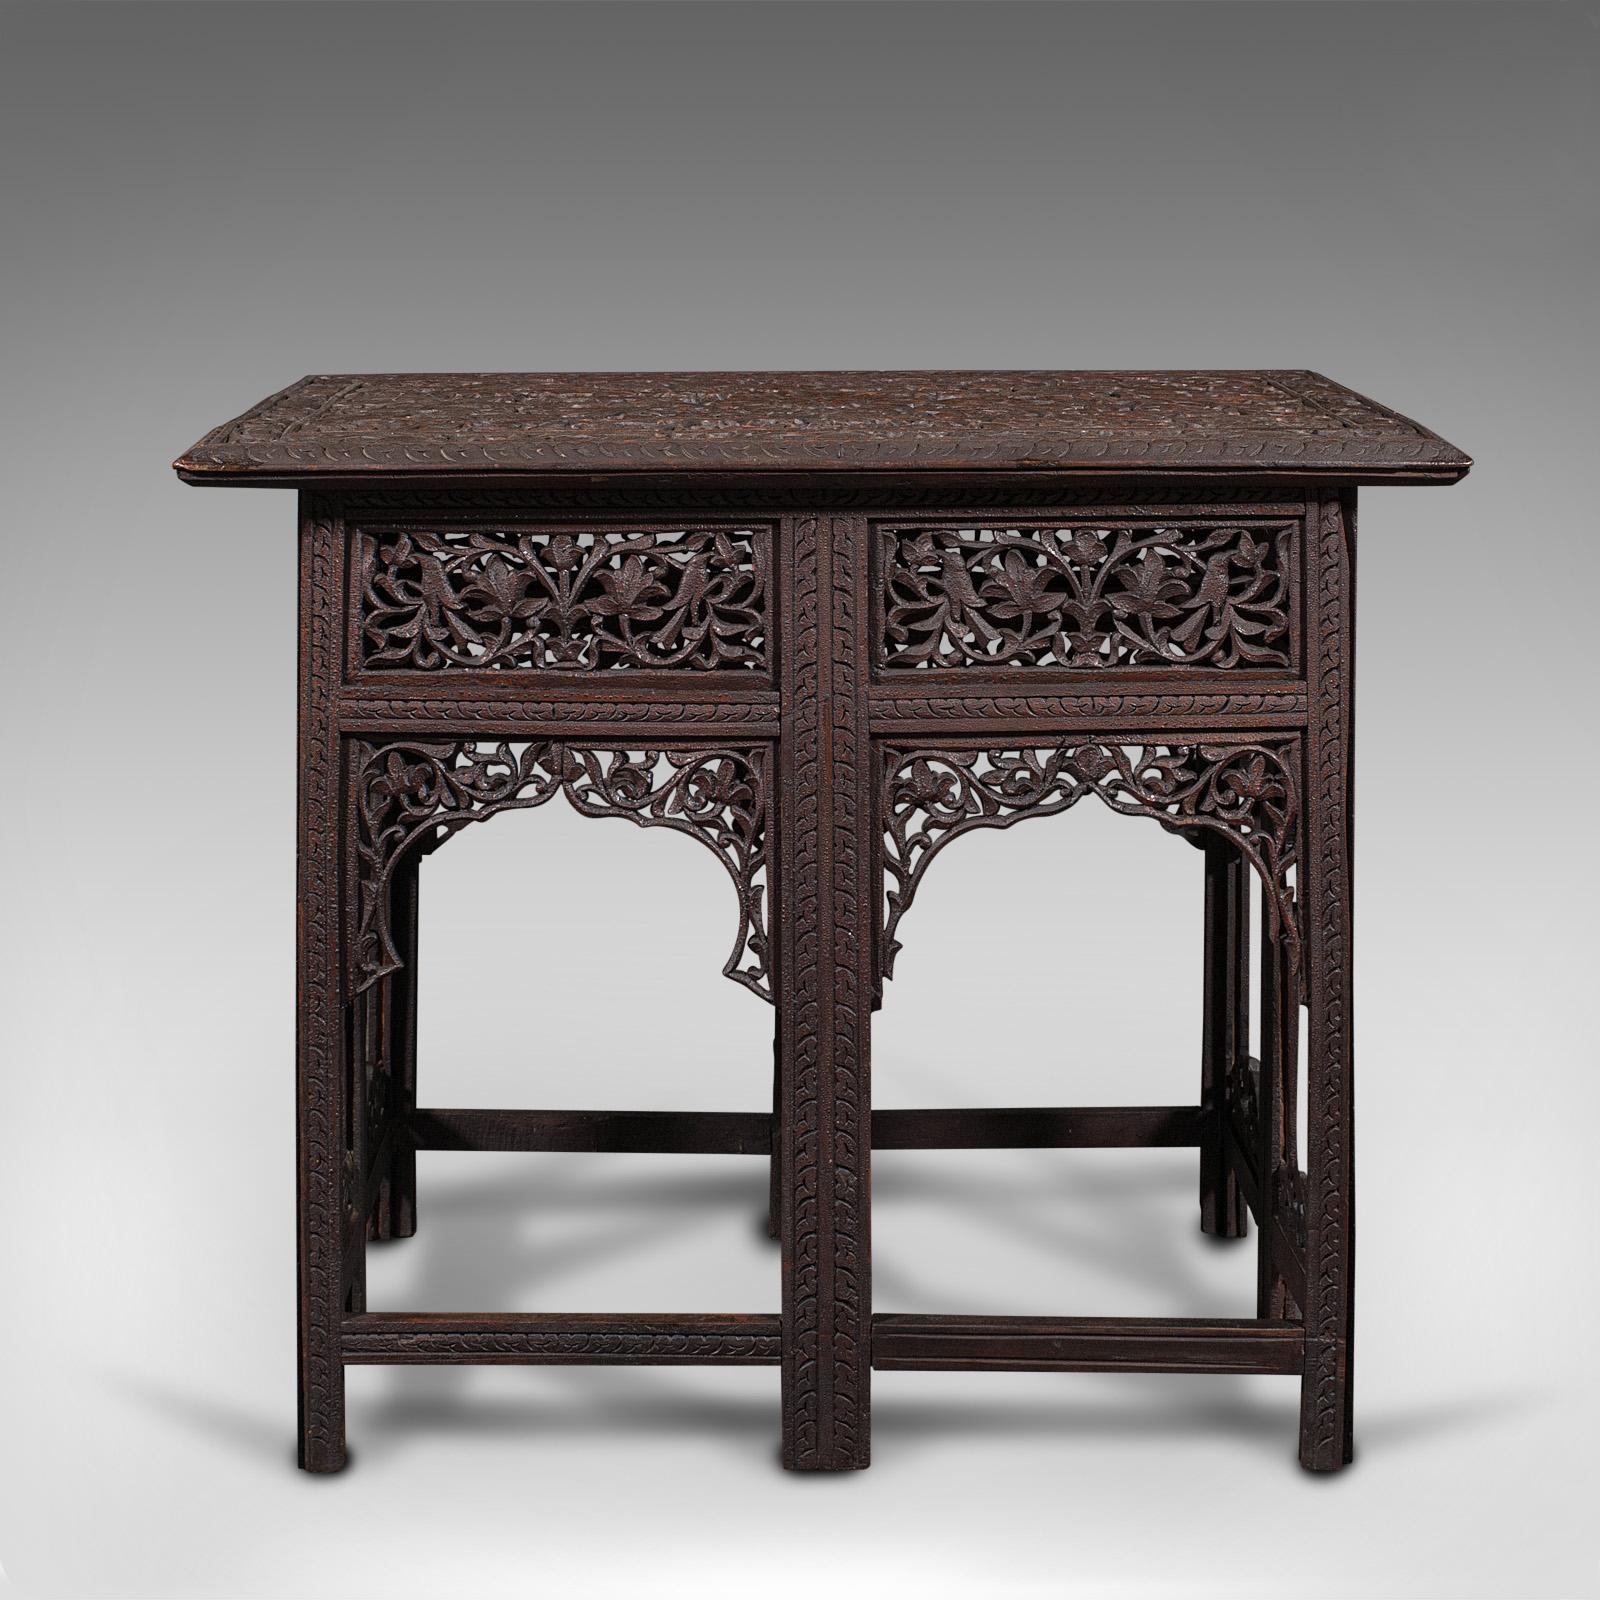 This is an antique folding campaign table. An Anglo-Indian, teak colonial occasional table, dating to the mid Victorian period, circa 1880.

Ornately pierced fretwork and an unusual, rectangular folding form
Displays a desirable aged patina -